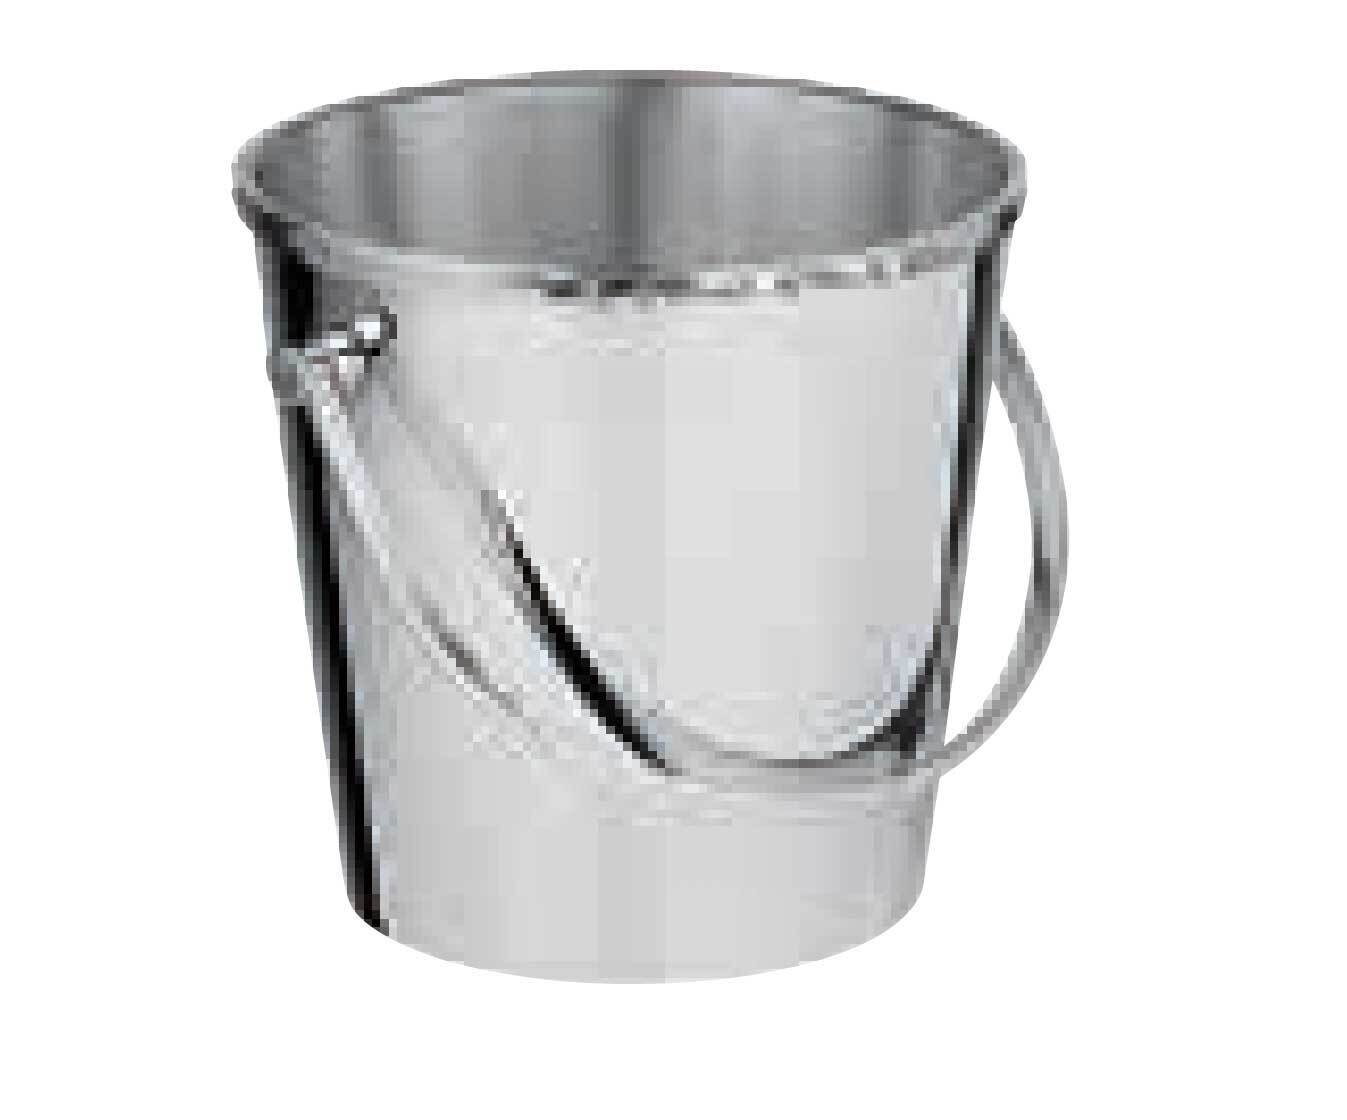 Ercuis Constantinople Ice Bucket 4.875 Inch Silver Plated F504106-13